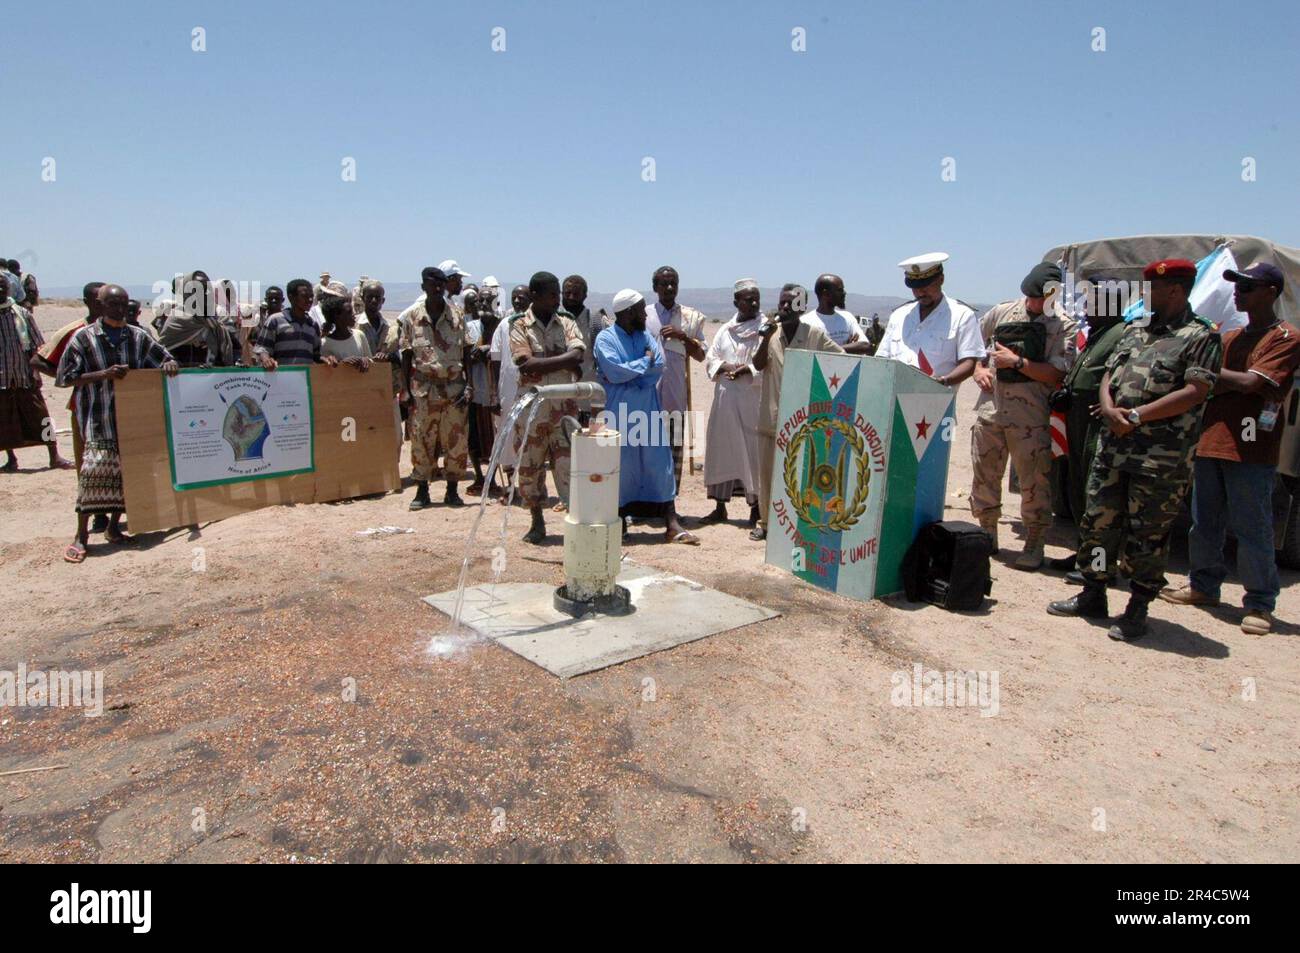 US Navy  Commisar of the Dikhil region of Djibouti, Africa, Mr.Moussa Djama, addresses the crowd during a well dedication. Stock Photo